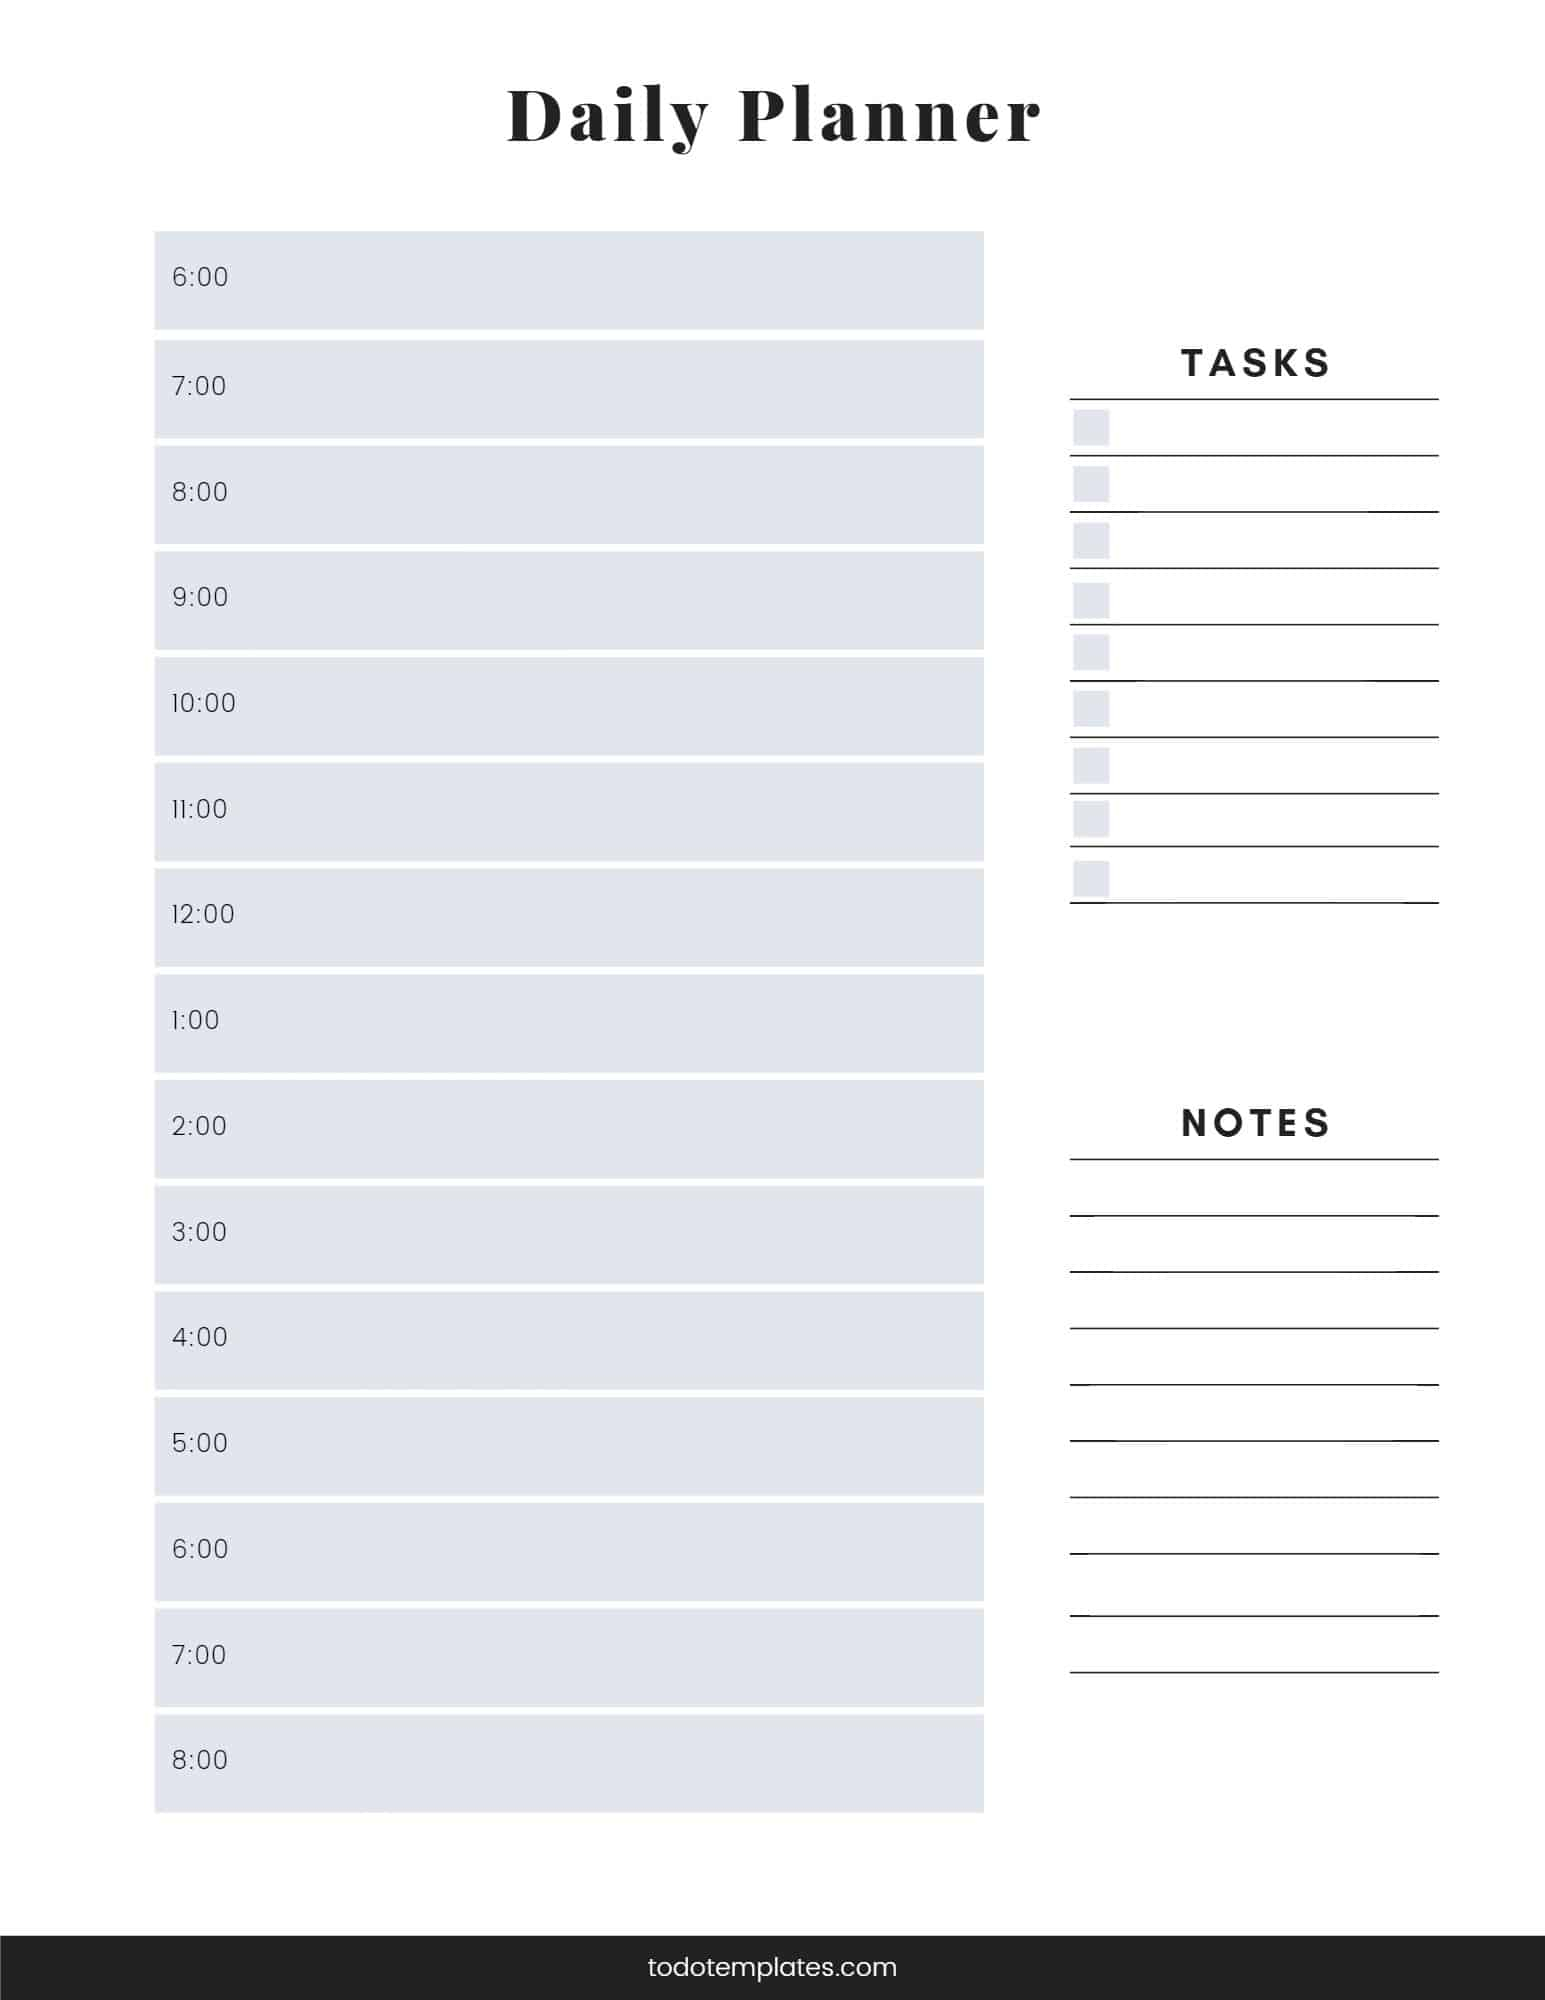 Printable Checklists You Can Download and Use For Anything Throughout Blank Checklist Template Pdf